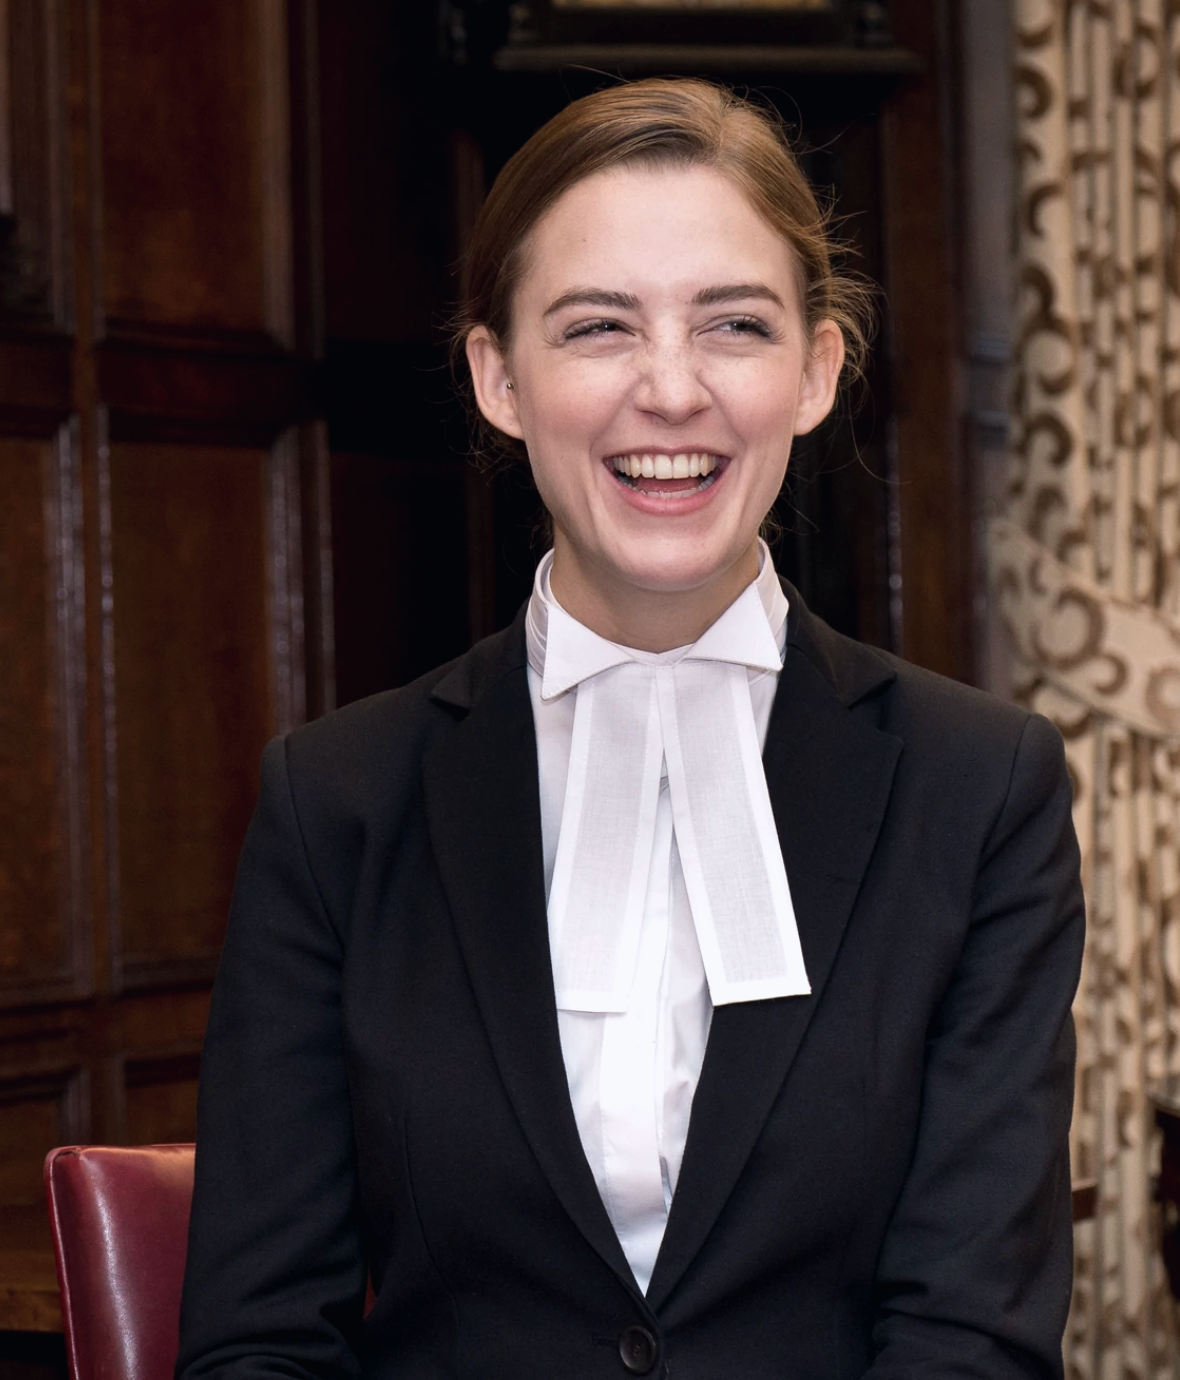 Young female lawyer stock photo. Image of solicitor, scales - 14485256